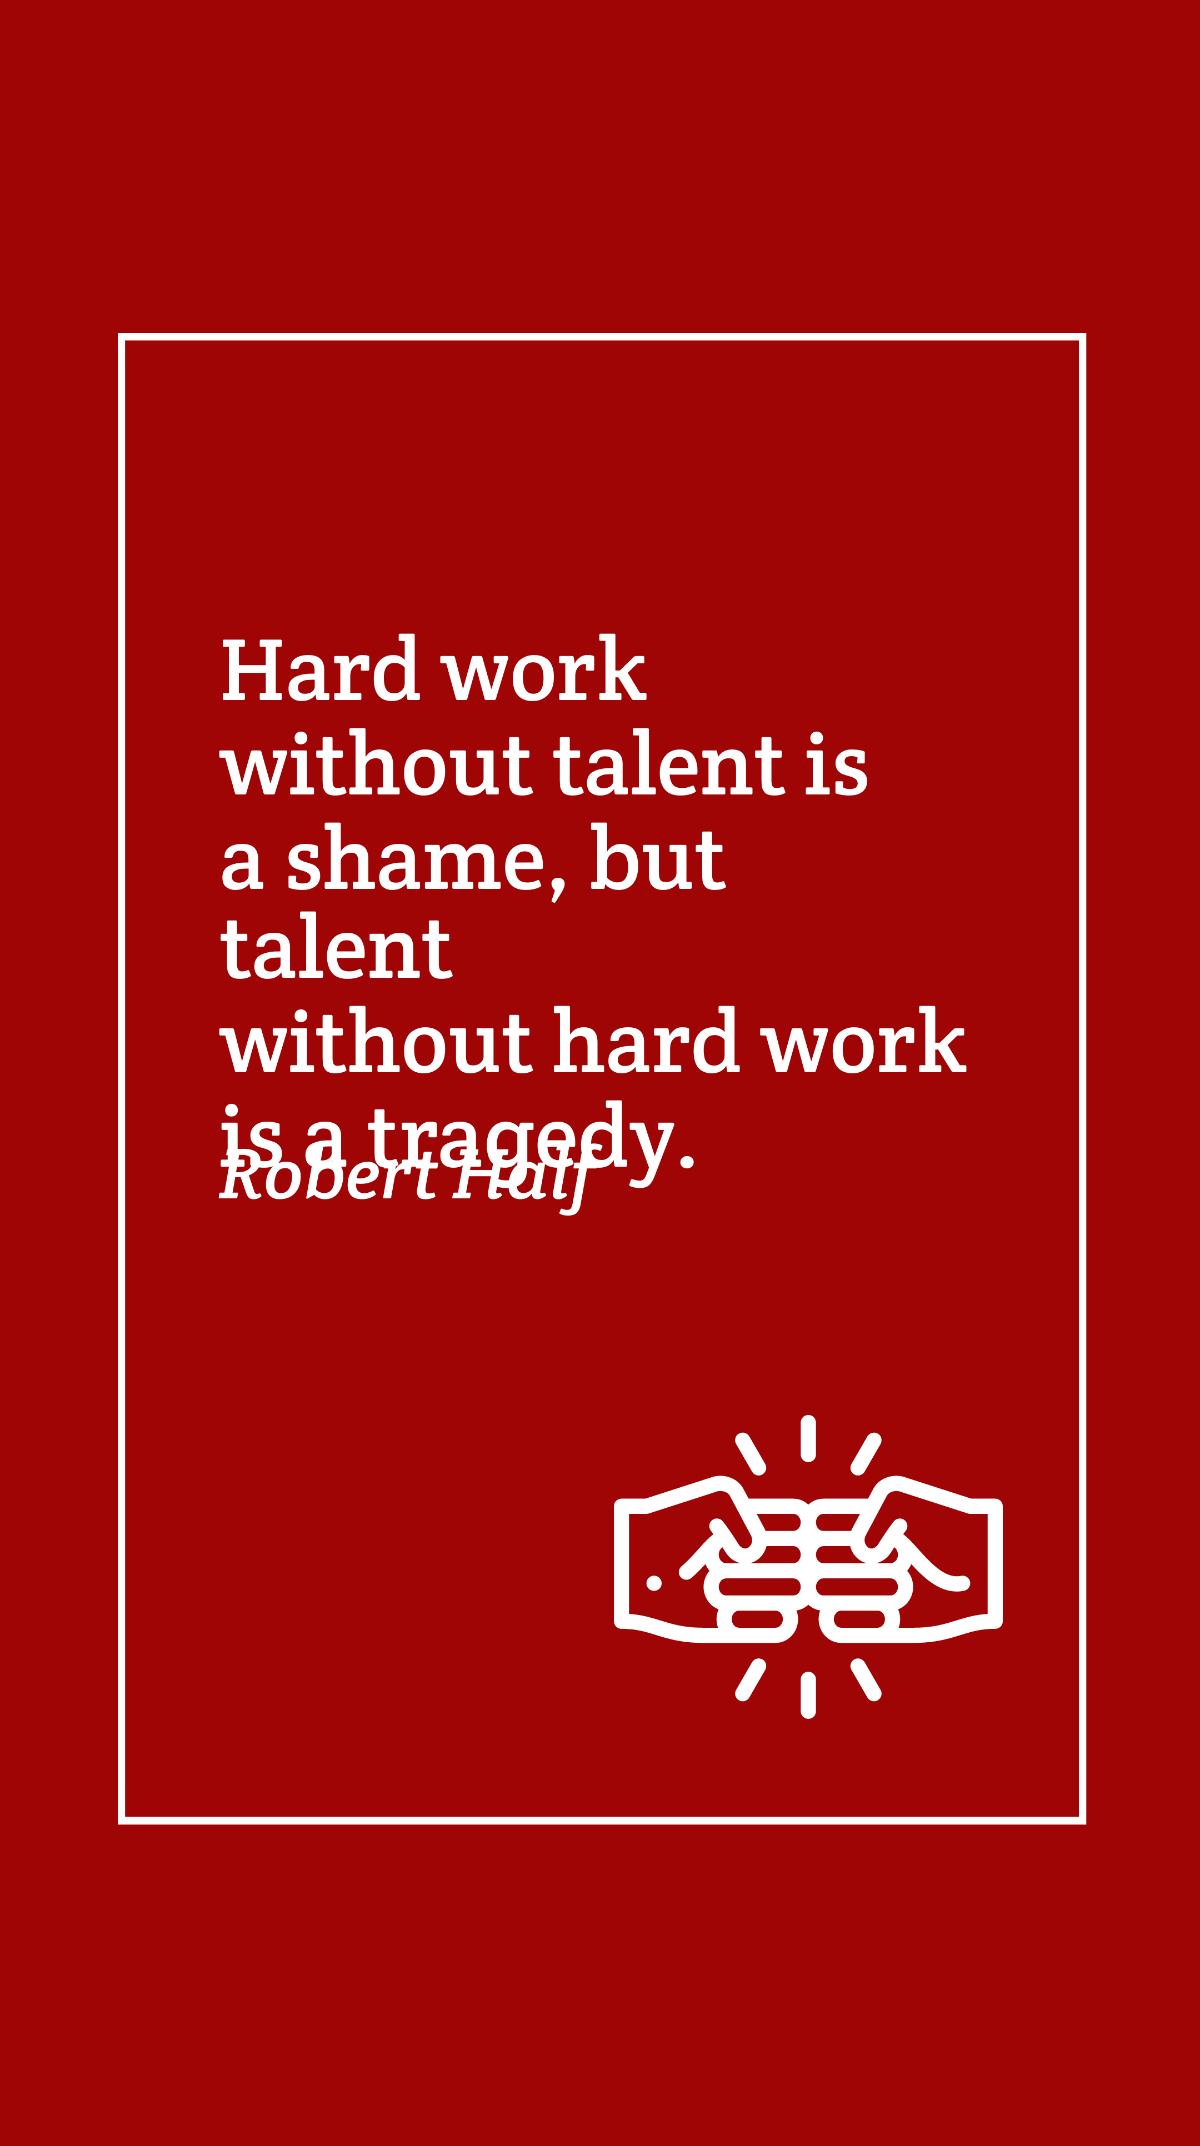 Robert Half - Hard work without talent is a shame, but talent without hard work is a tragedy. Template